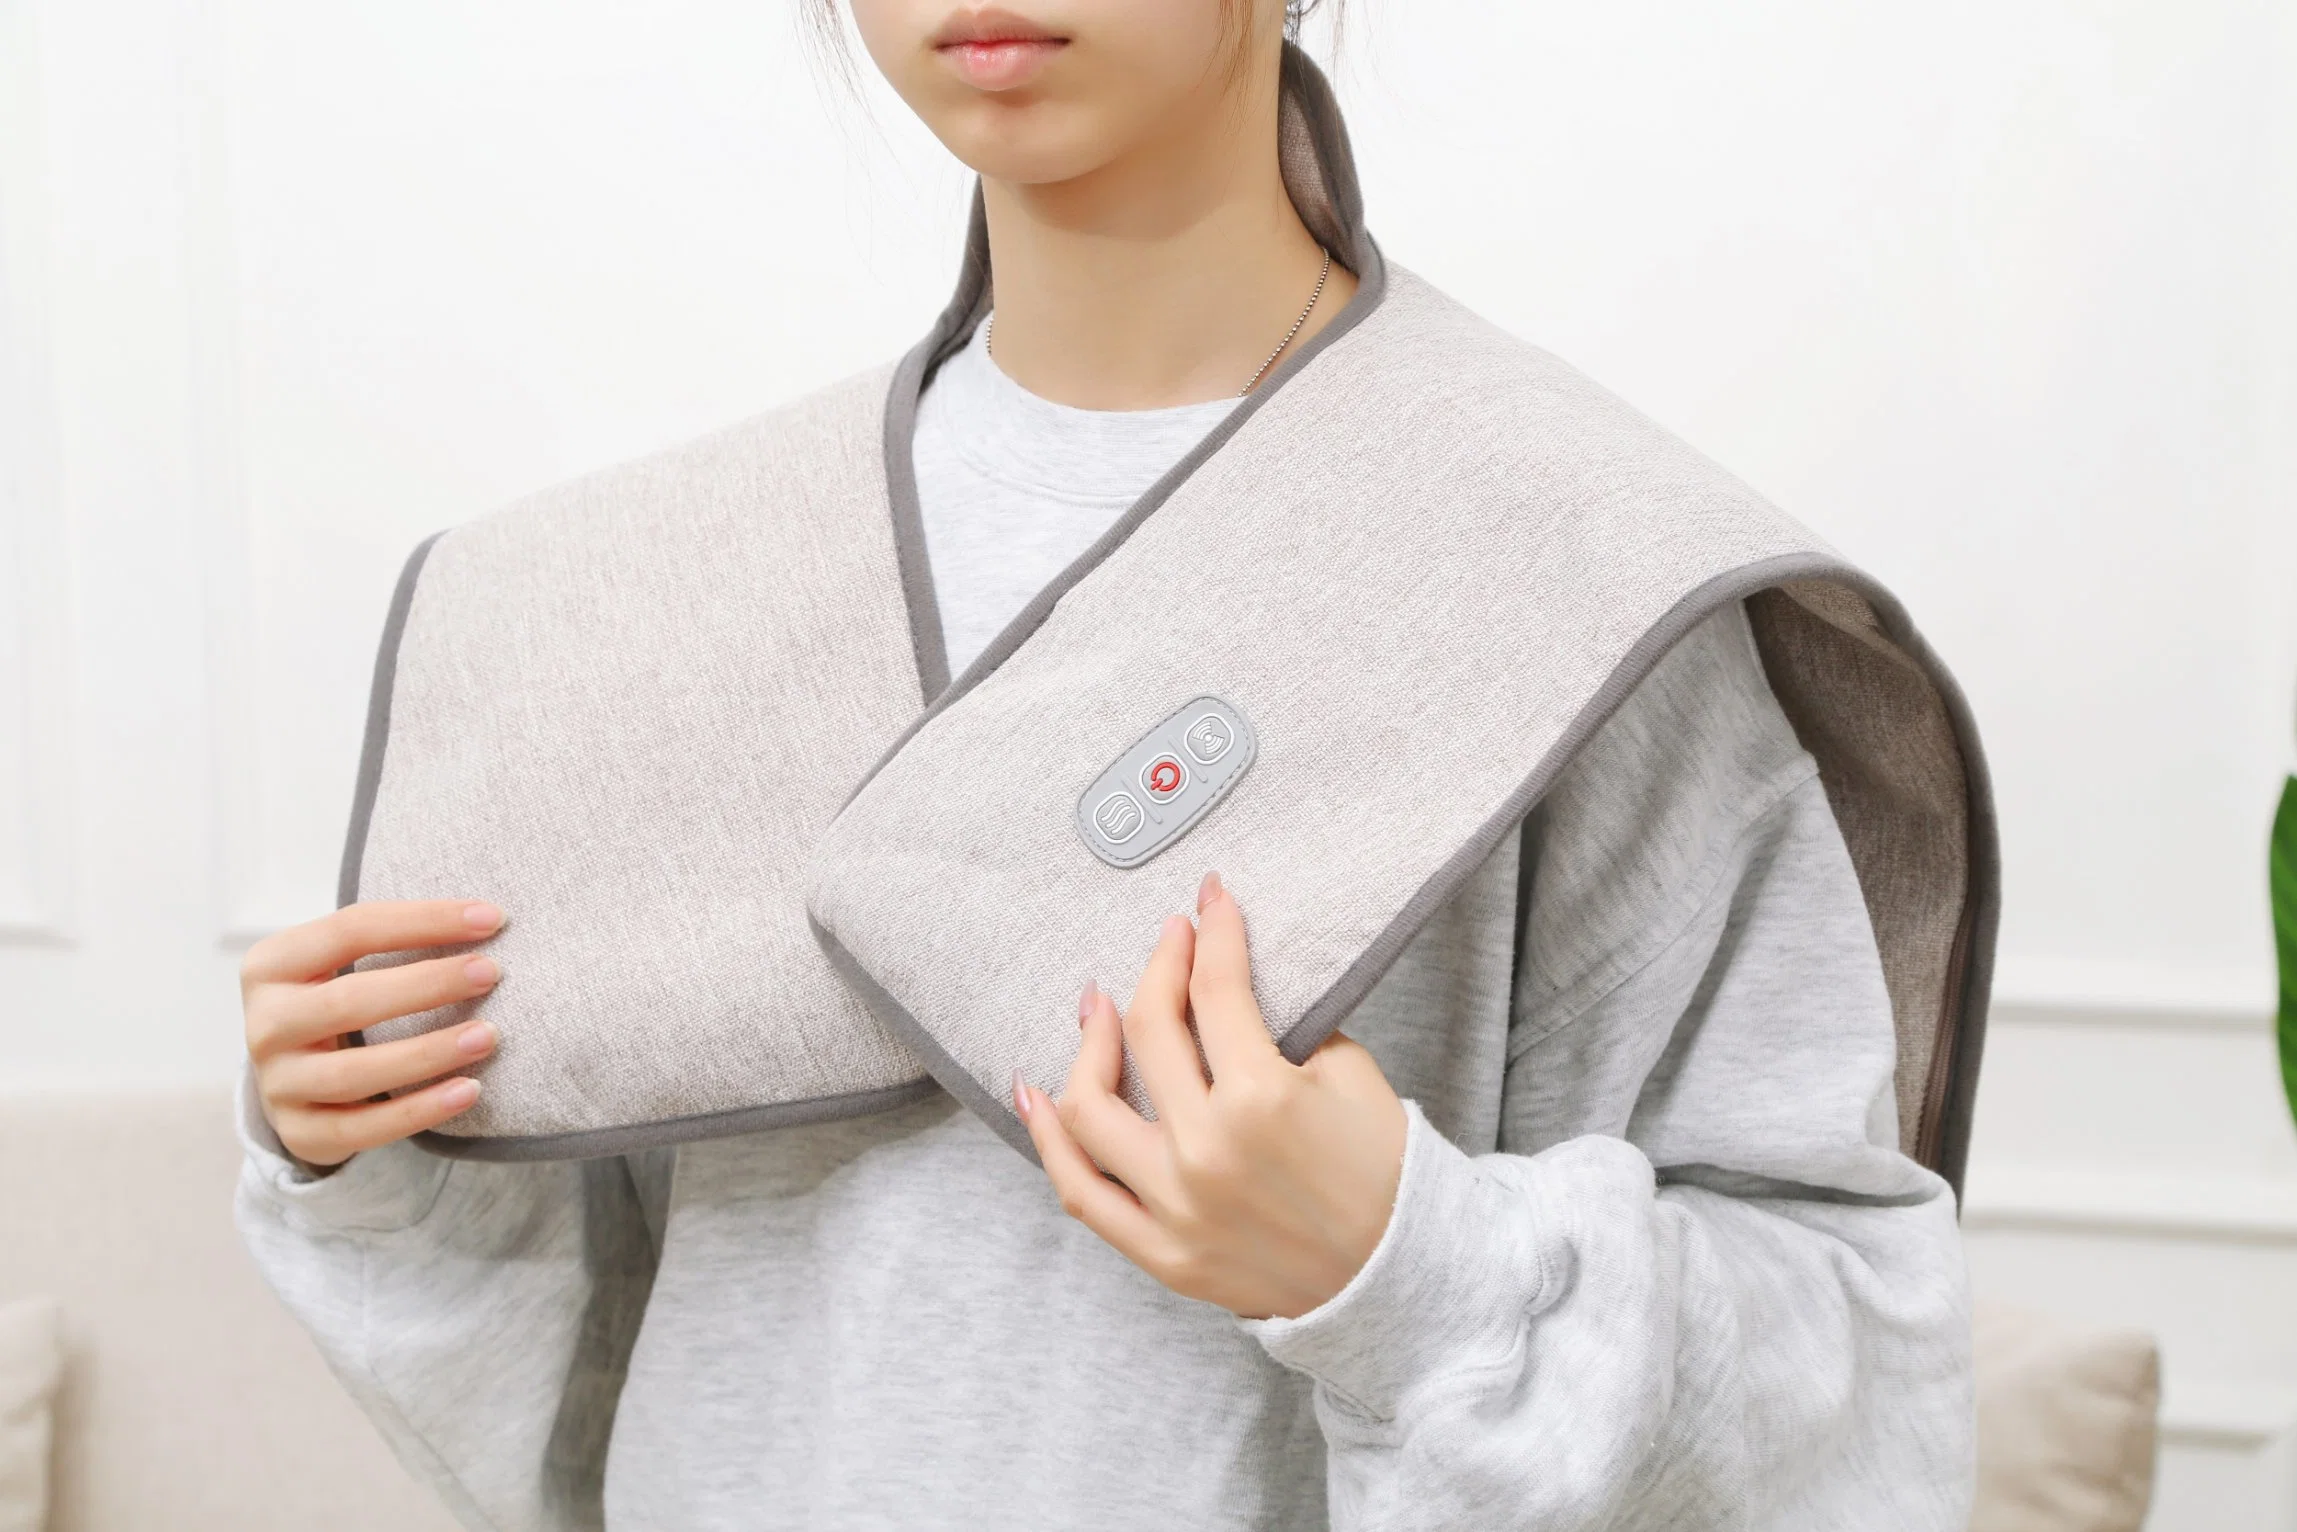 Hot Pad Infrared Shoulder Pad to Relieve Back Pain